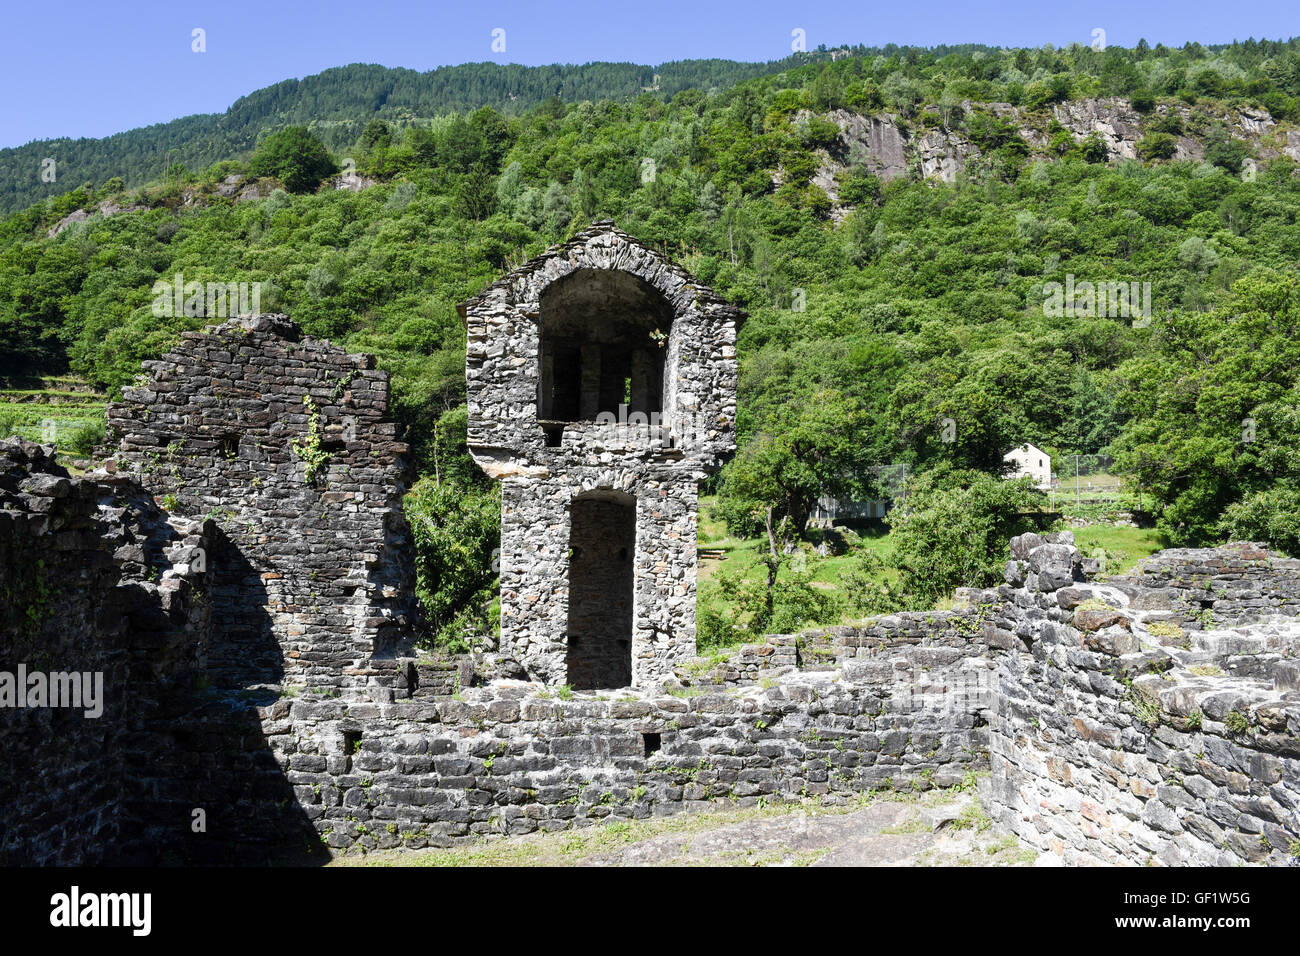 Ruins of Serravalle castle at Semione on Blenio valley on the Swiss alps Stock Photo